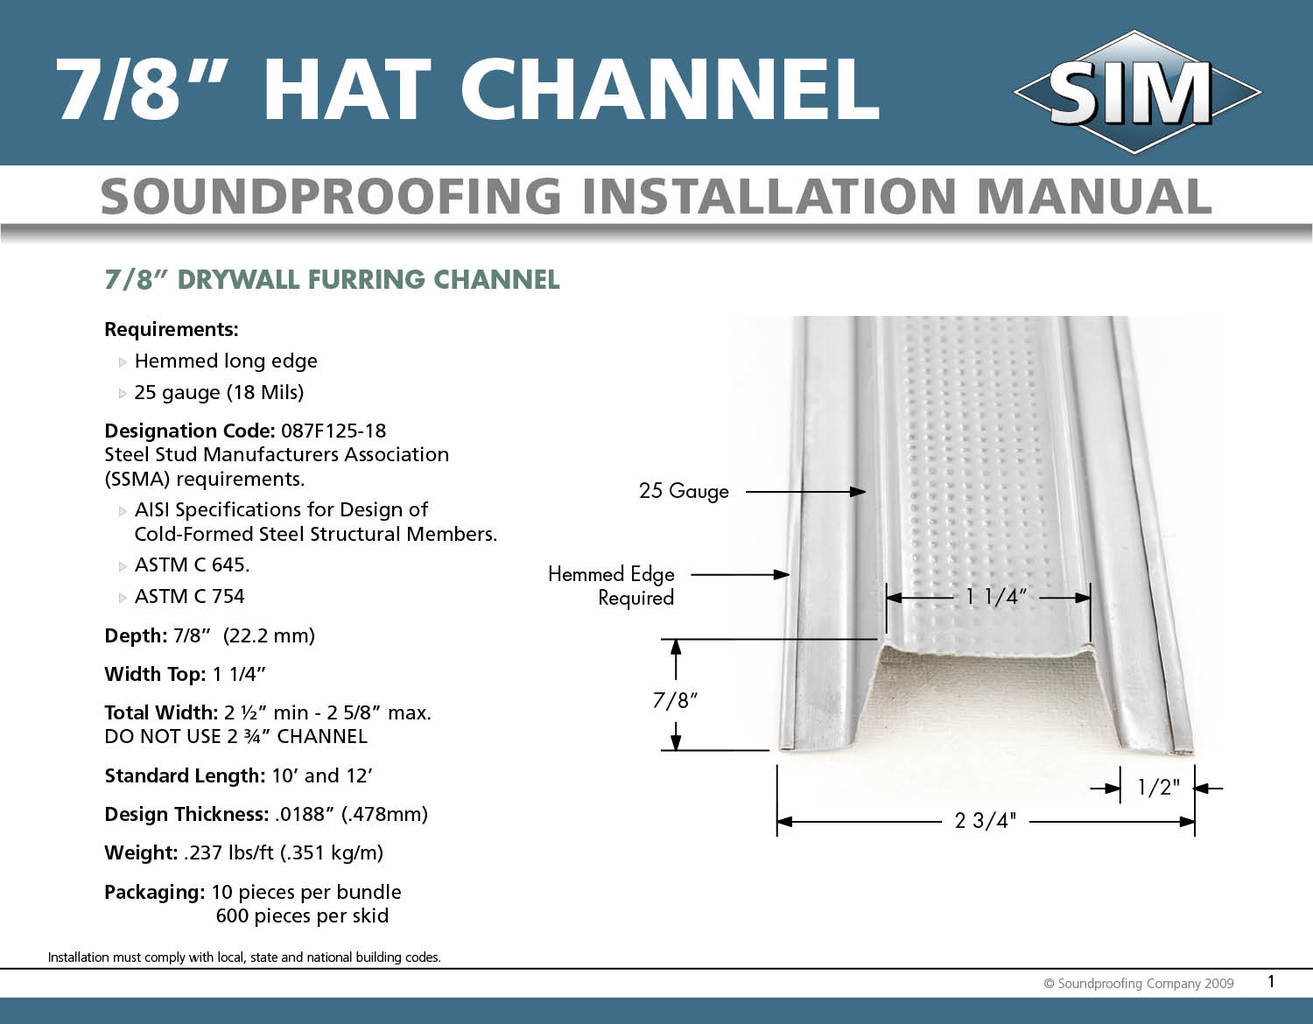 Drywall Furring Channel / Hat Channel Specification